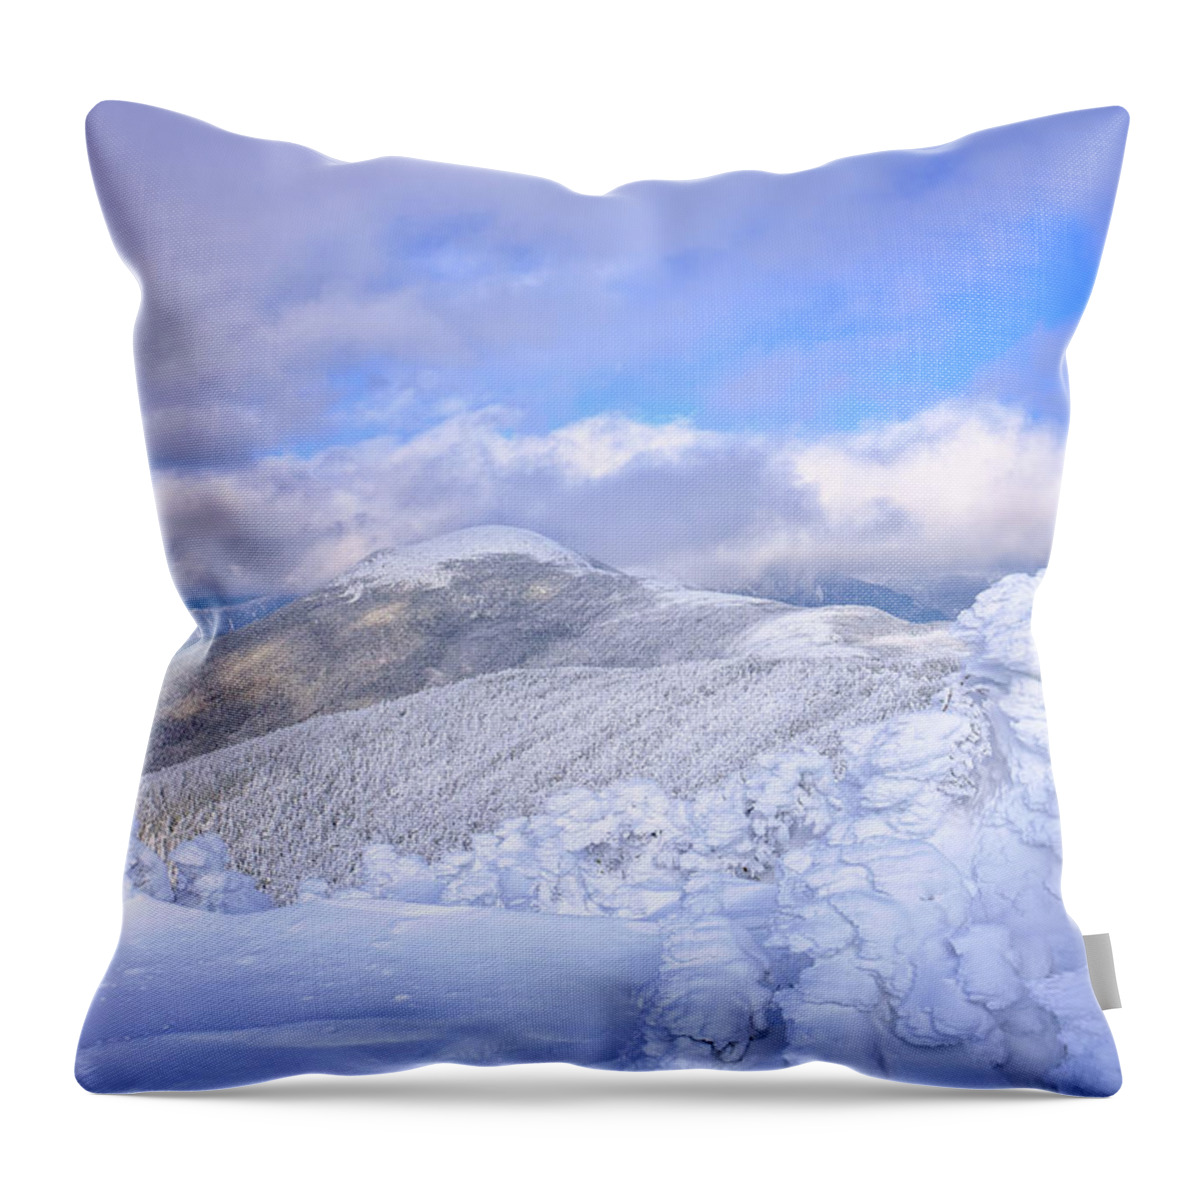 000 Footer Throw Pillow featuring the photograph White by Jeff Sinon